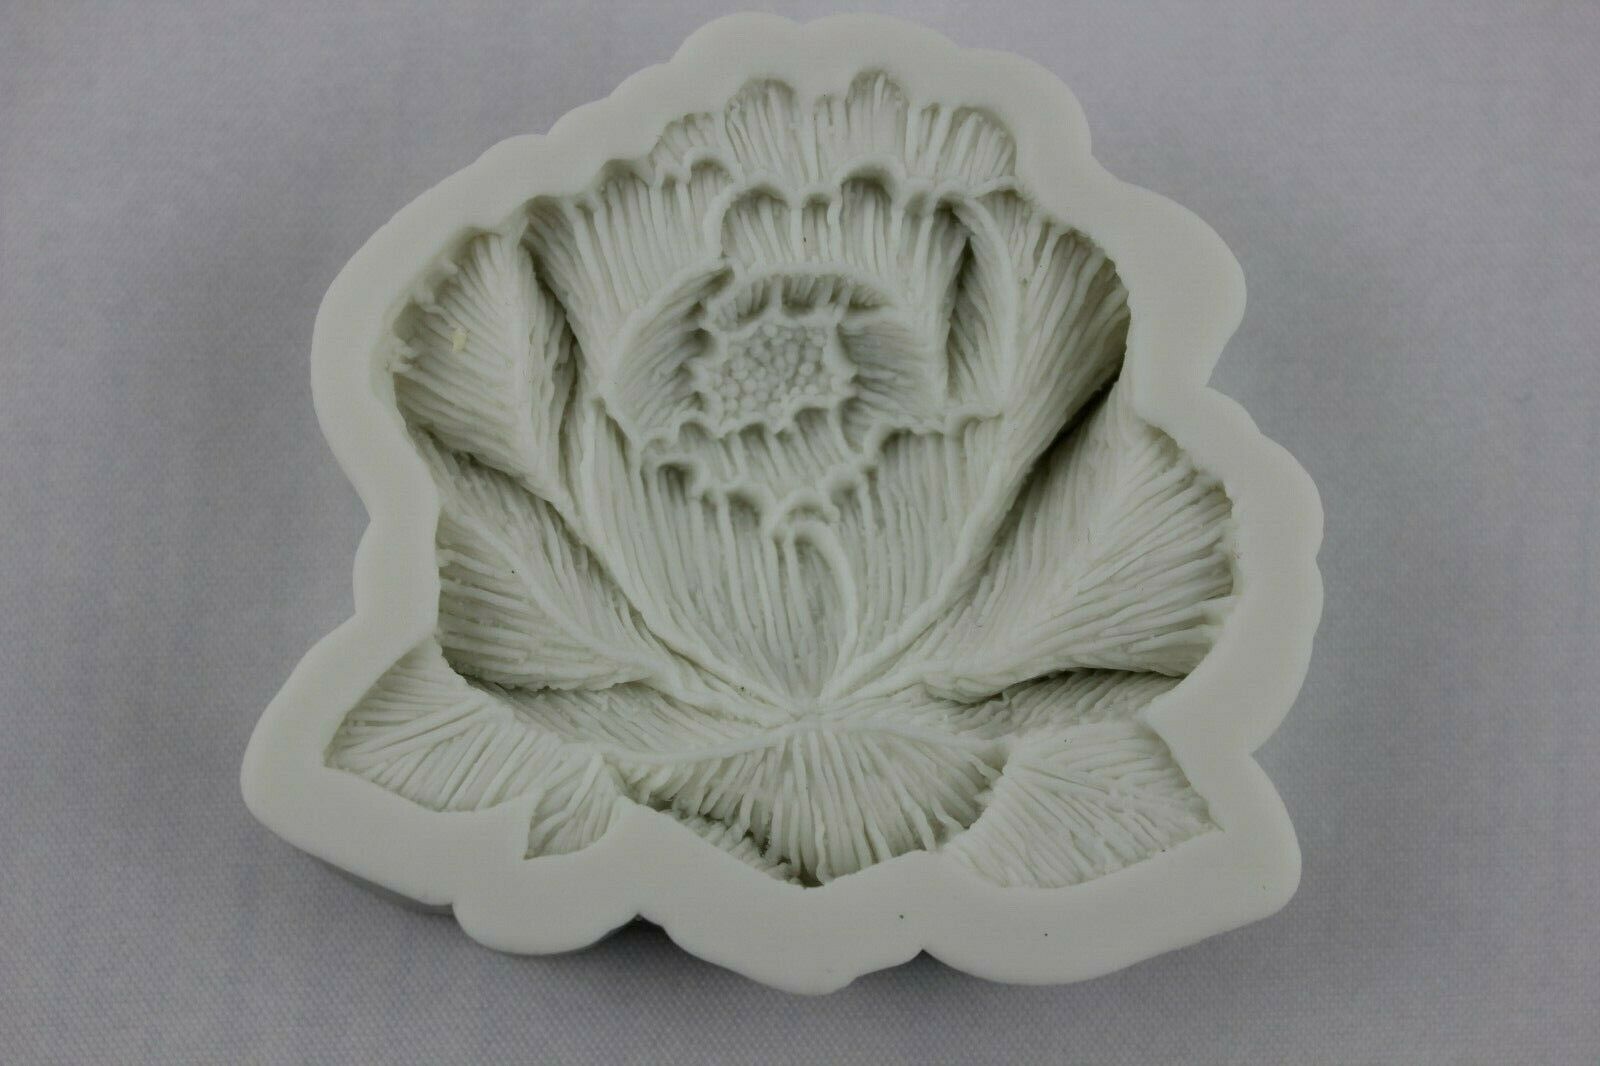 attachment-https://www.cupcakeaddicts.co.uk/wp-content/uploads/imported/9/Large-Flower-silicone-mould-Resin-Icing-Fondant-Ice-Soap-Sugar-Craft-Melt-4-324684415989.jpg